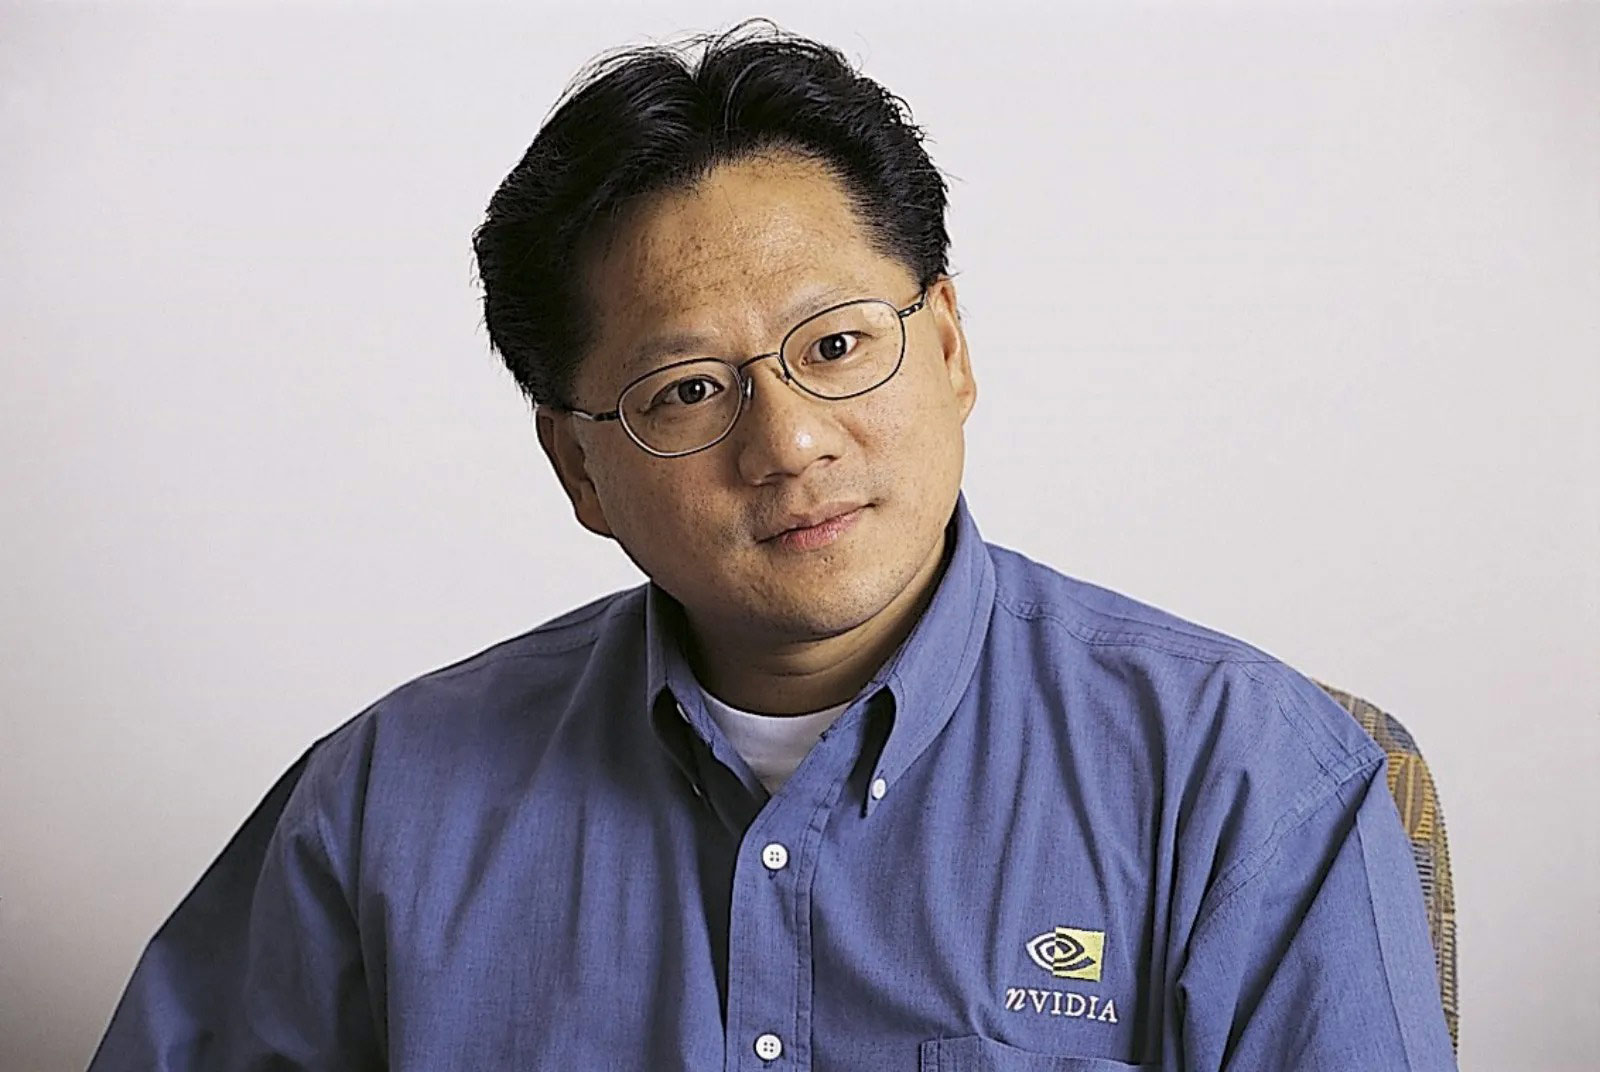 Nvidia Founder Jensen Huang's Path to Success